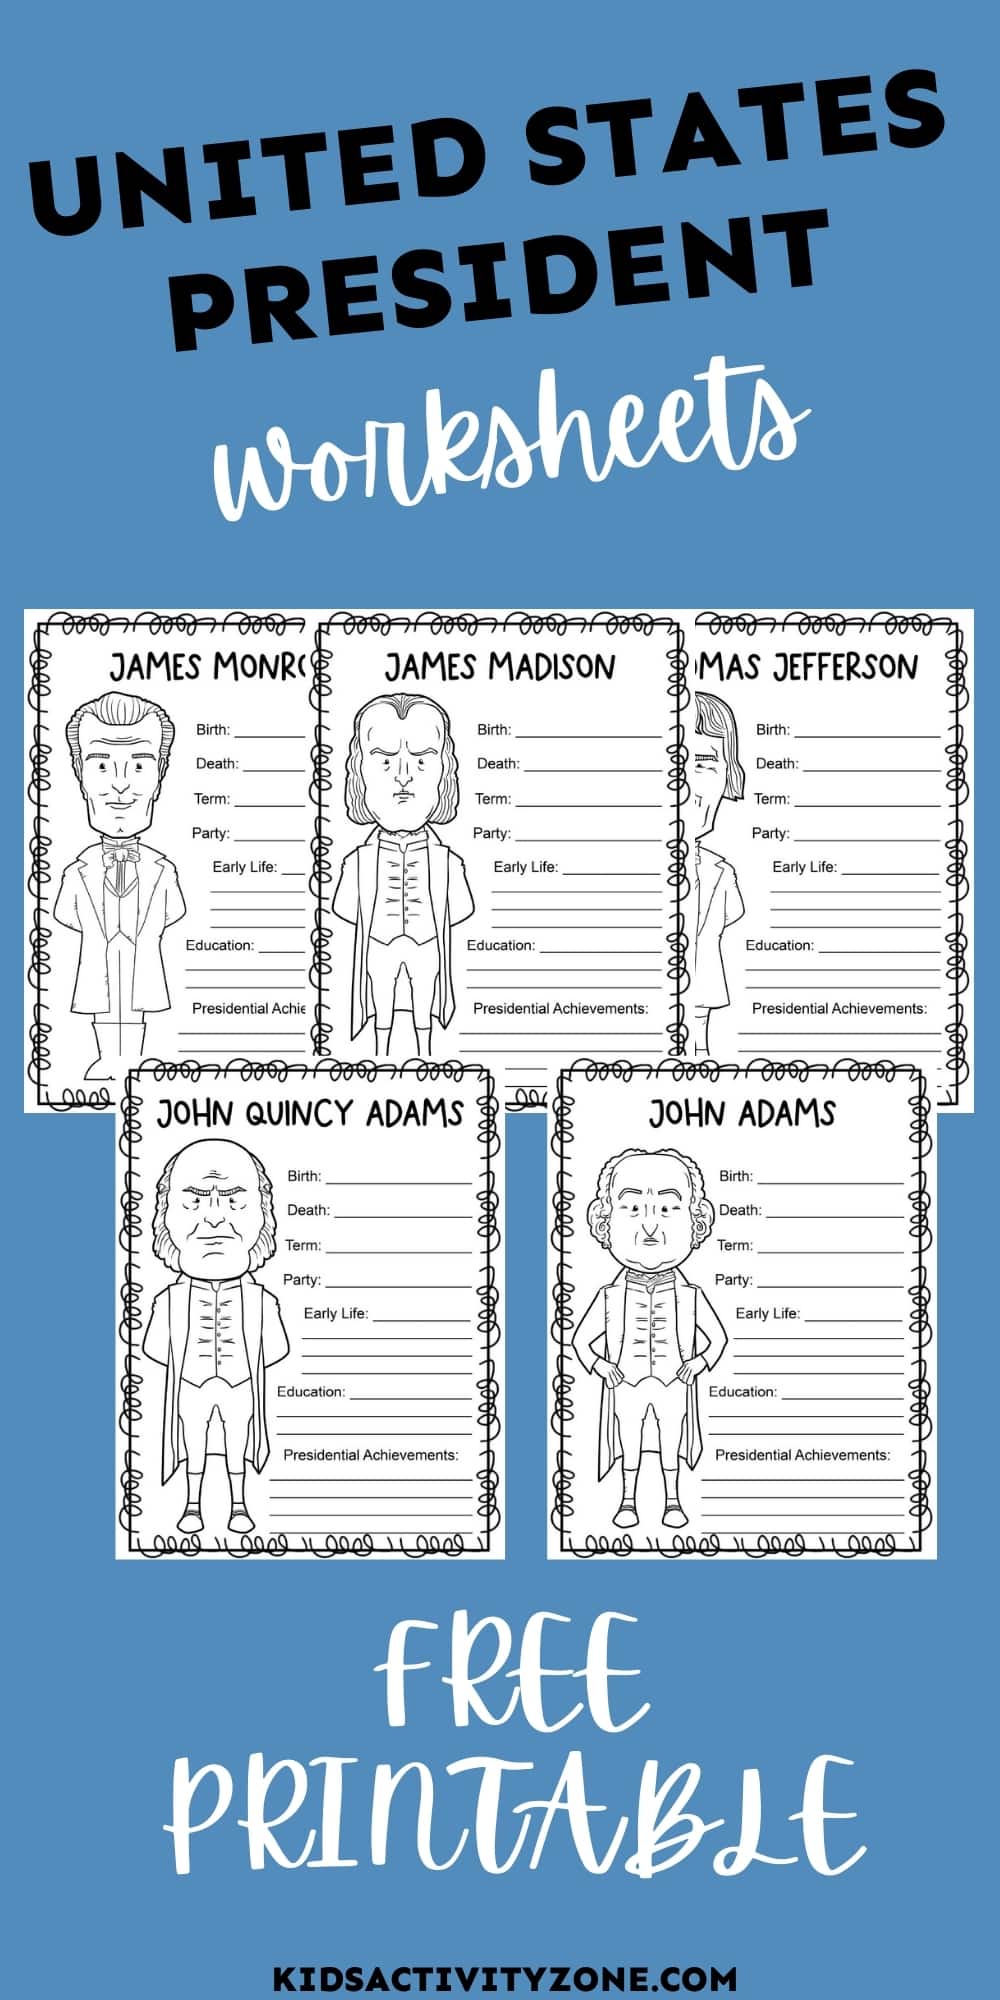 Free Printable US President Worksheets are the perfect supplement to a unit about the National Presidents. Each President has a sheet for students to record the President's Birth, Death, Term, Party, information about their early life, education and presidential achievements. 